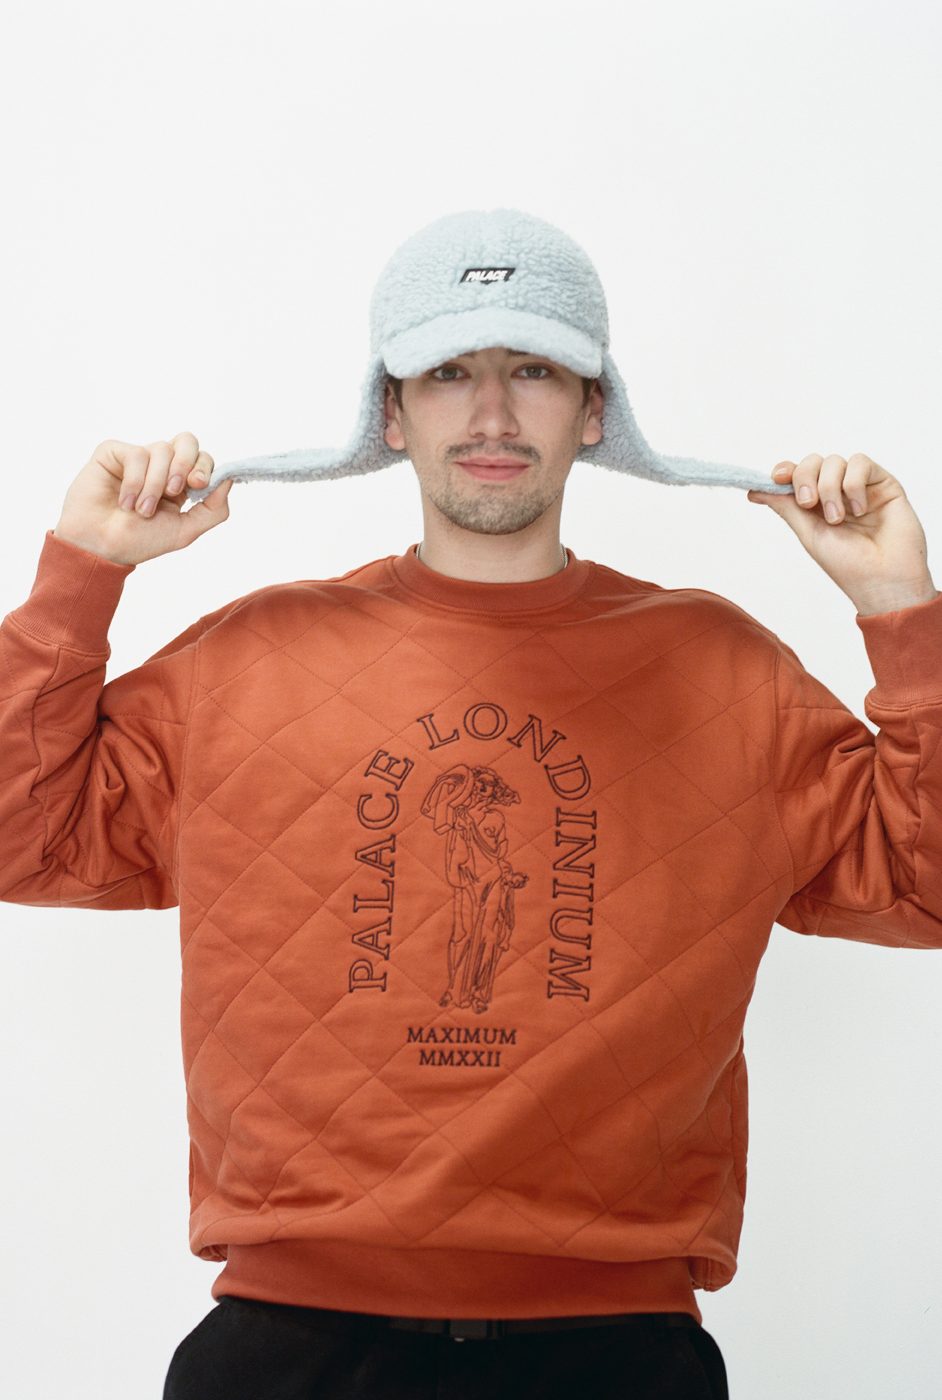 palace-skateboards-2022-ultimo-collection-release-20221224-week5